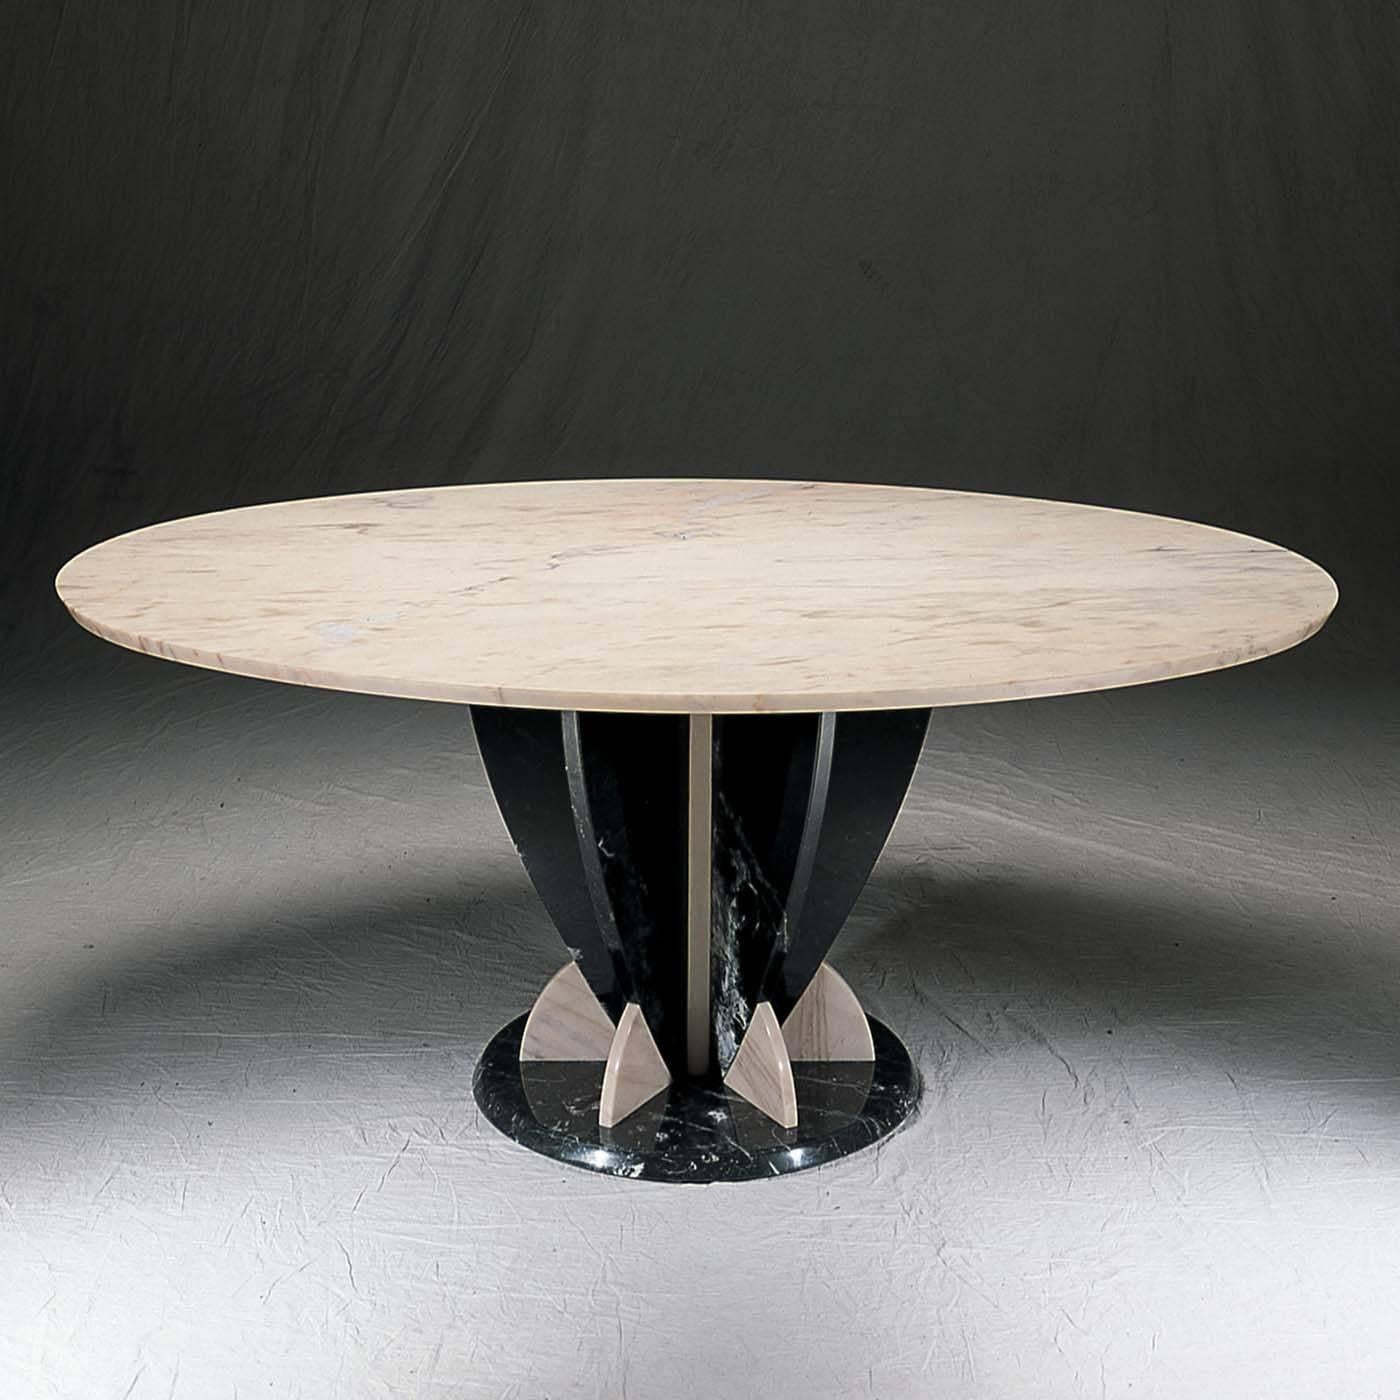 Sole protagonist of a sophisticated dining room, this table is an aesthetically stunning piece that combines the preciously elaborated base made of black Marquinia marble with a sleek, round top of pink Portogallo marble. The monolithic structure is